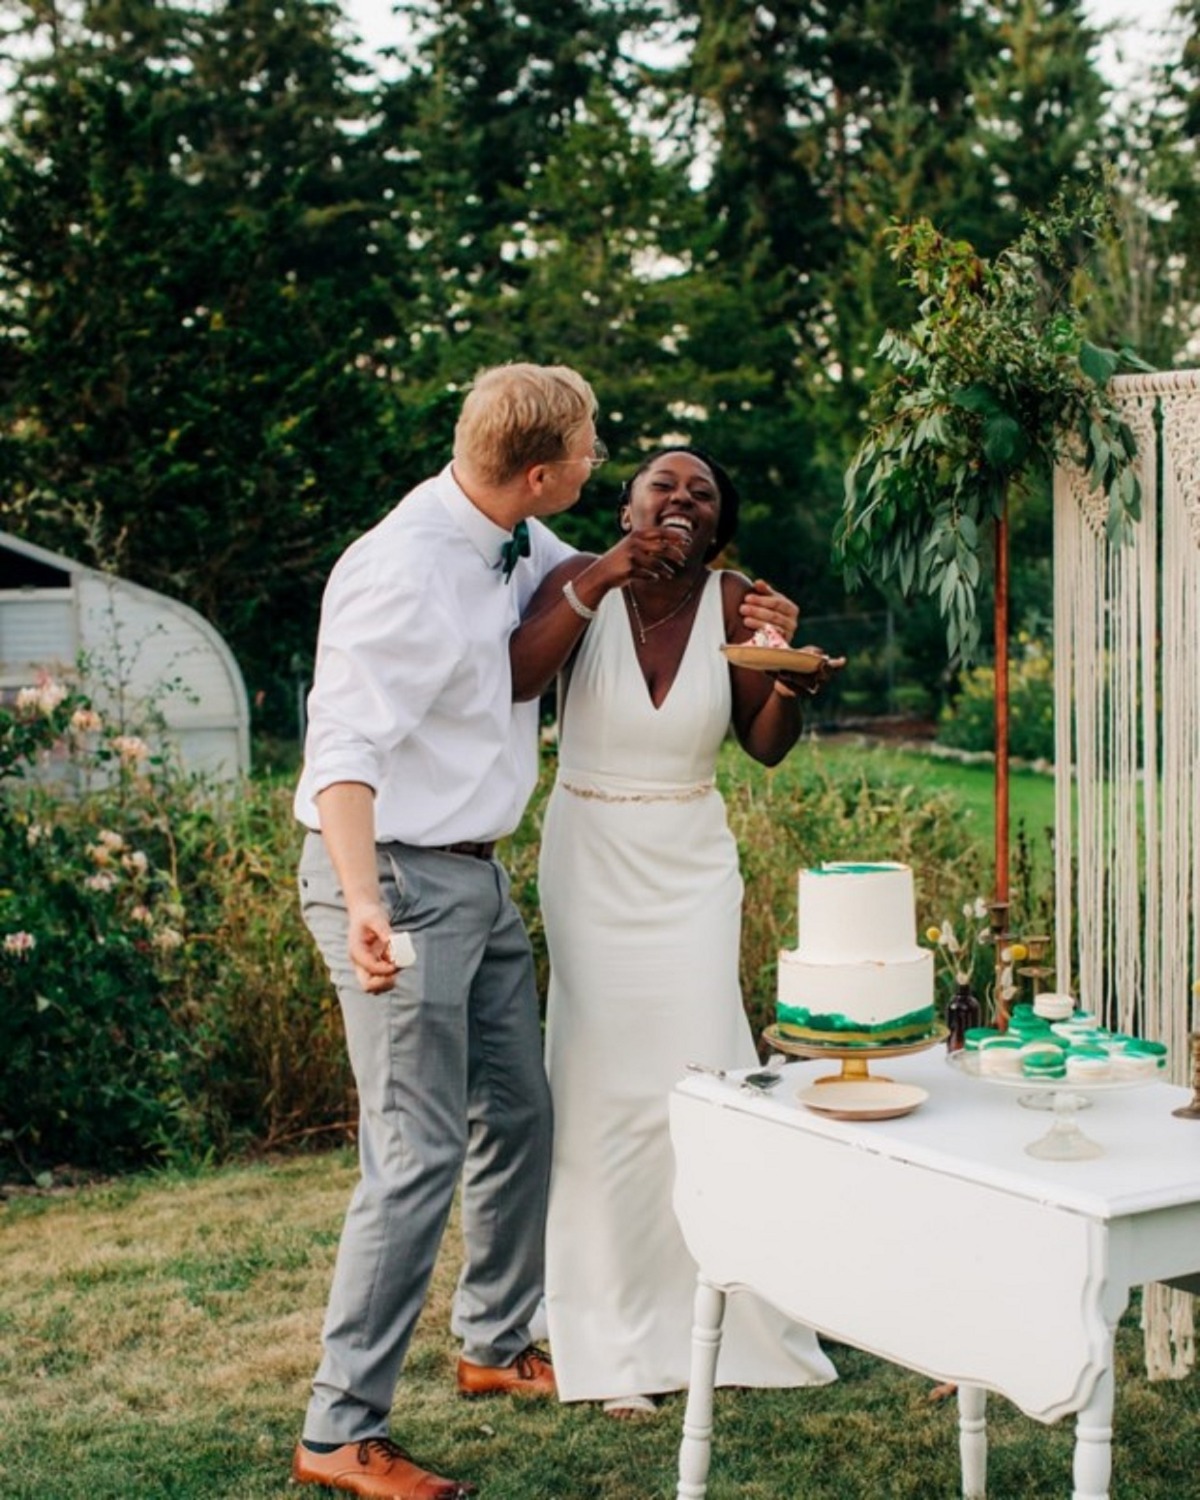 How To Have An Intimate Backyard Wedding Despite COVID-19